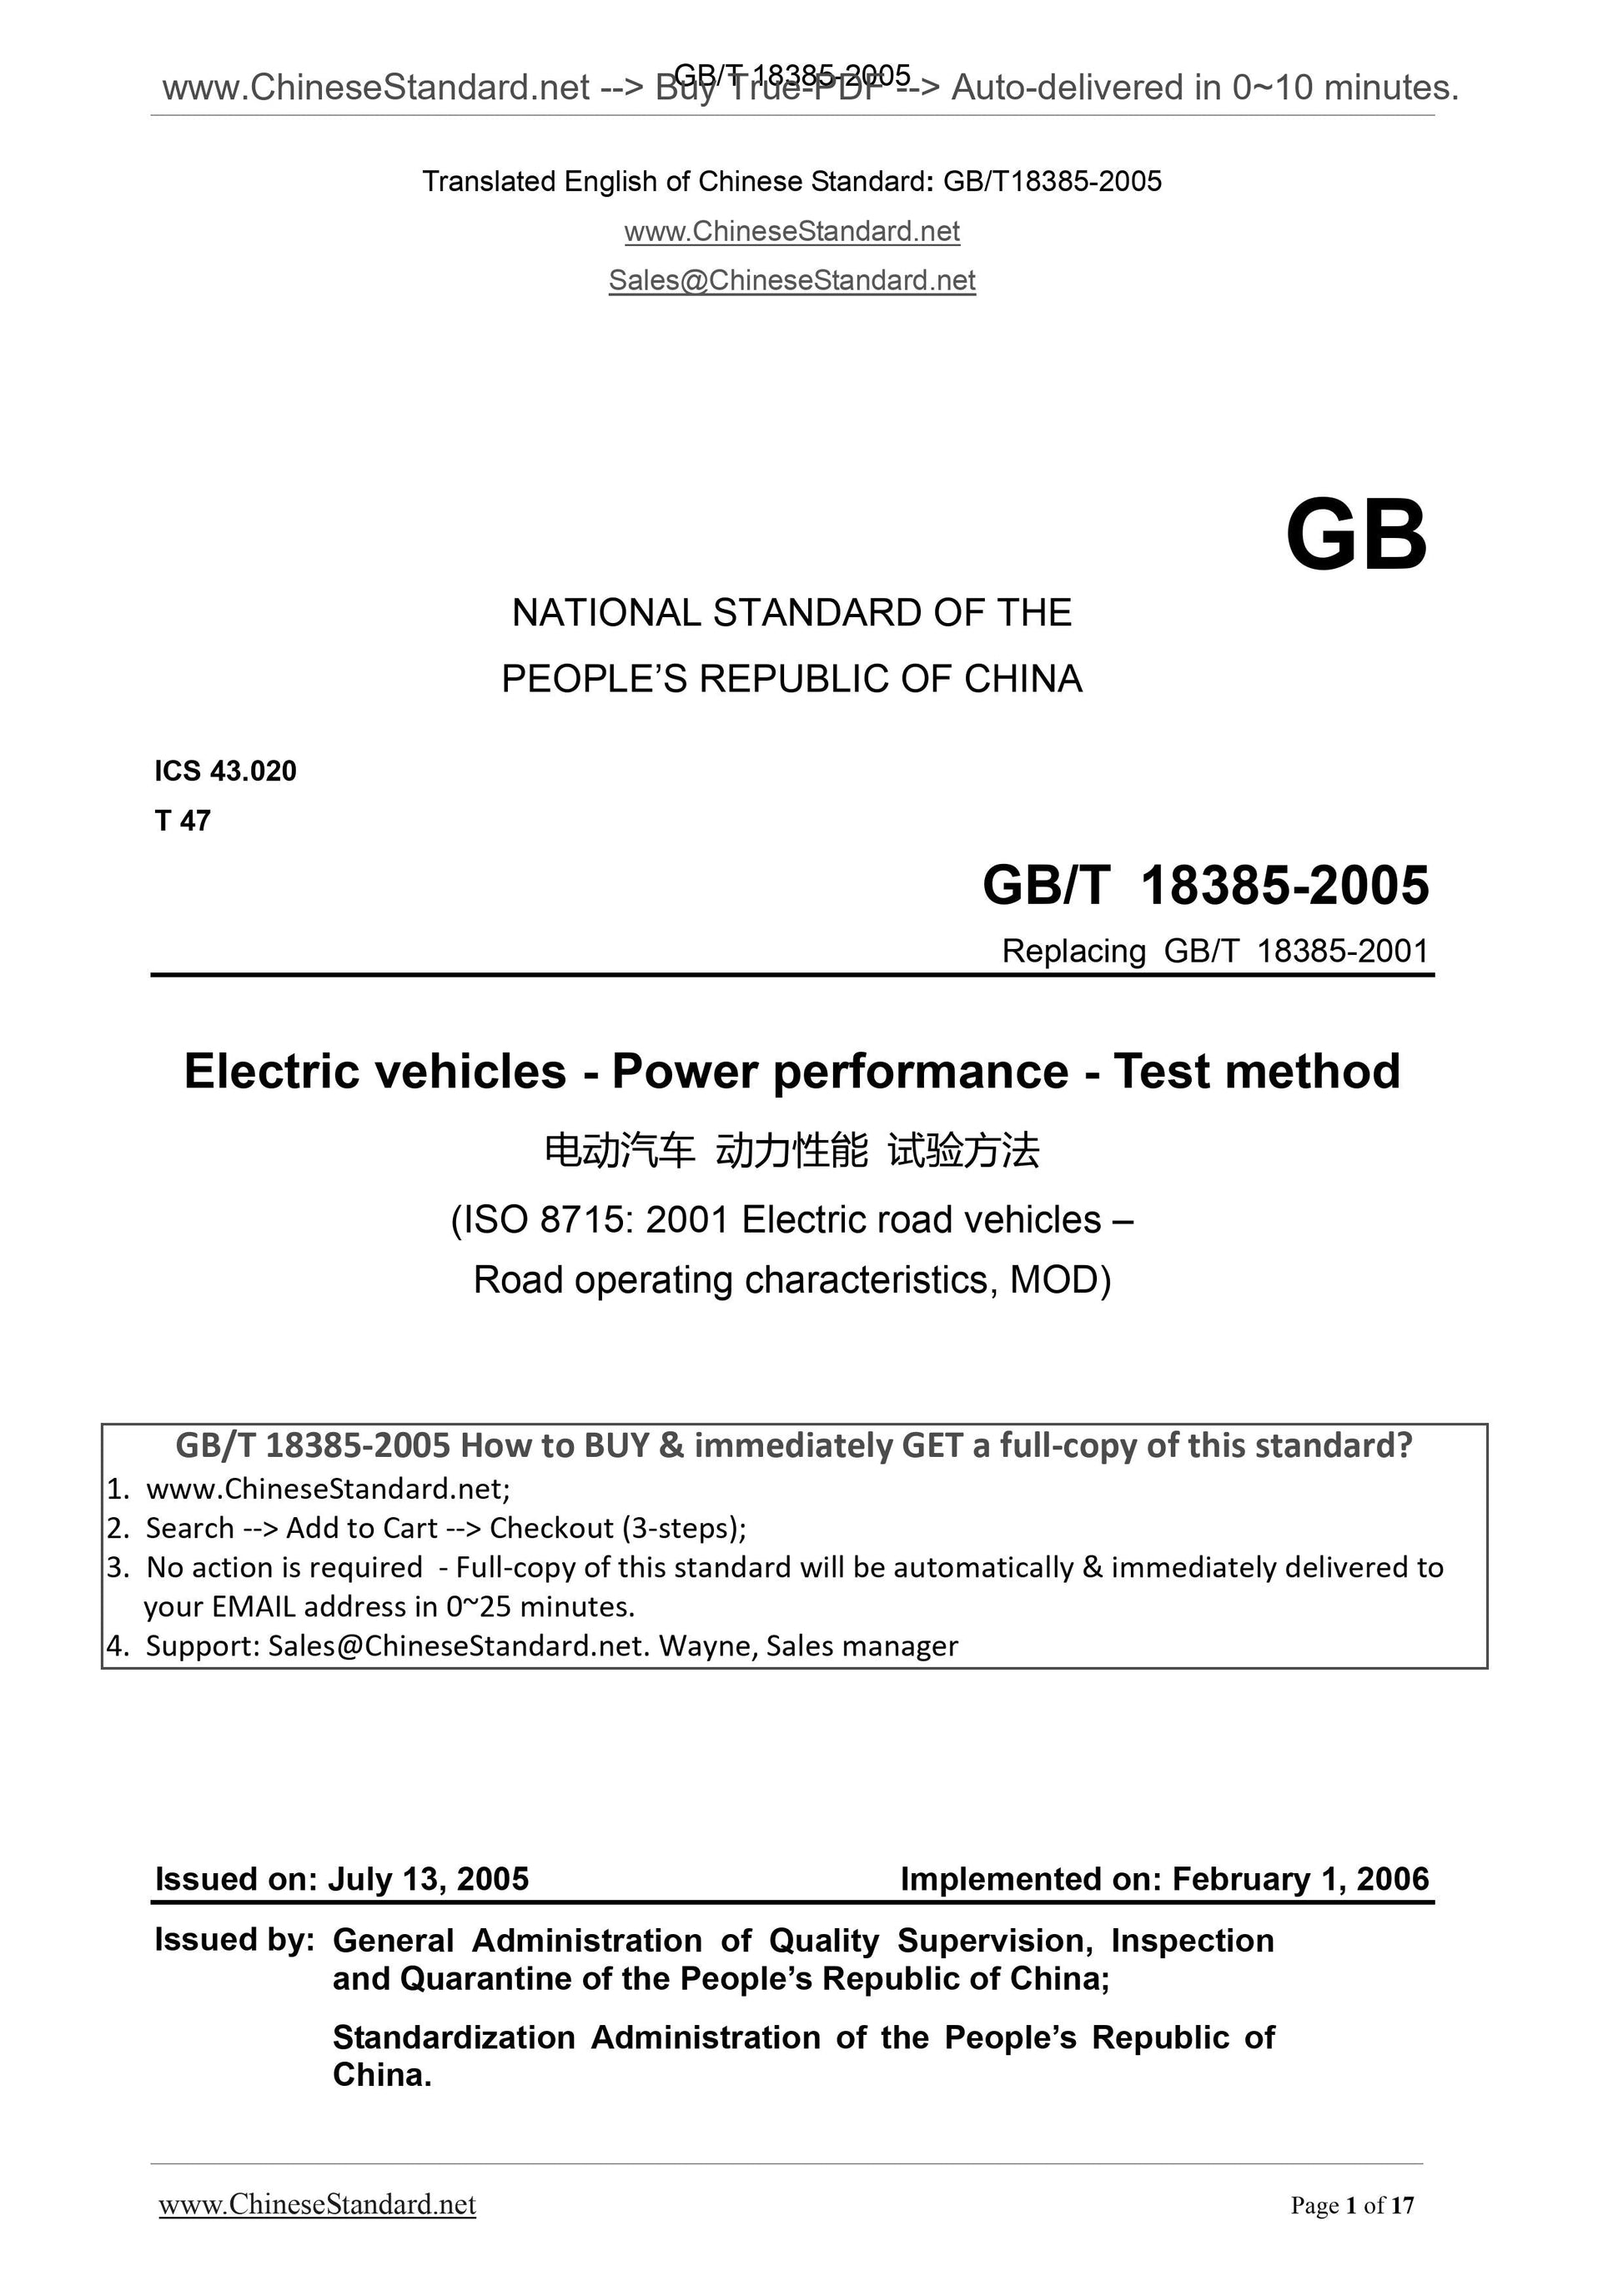 GB/T 18385-2005 Page 1